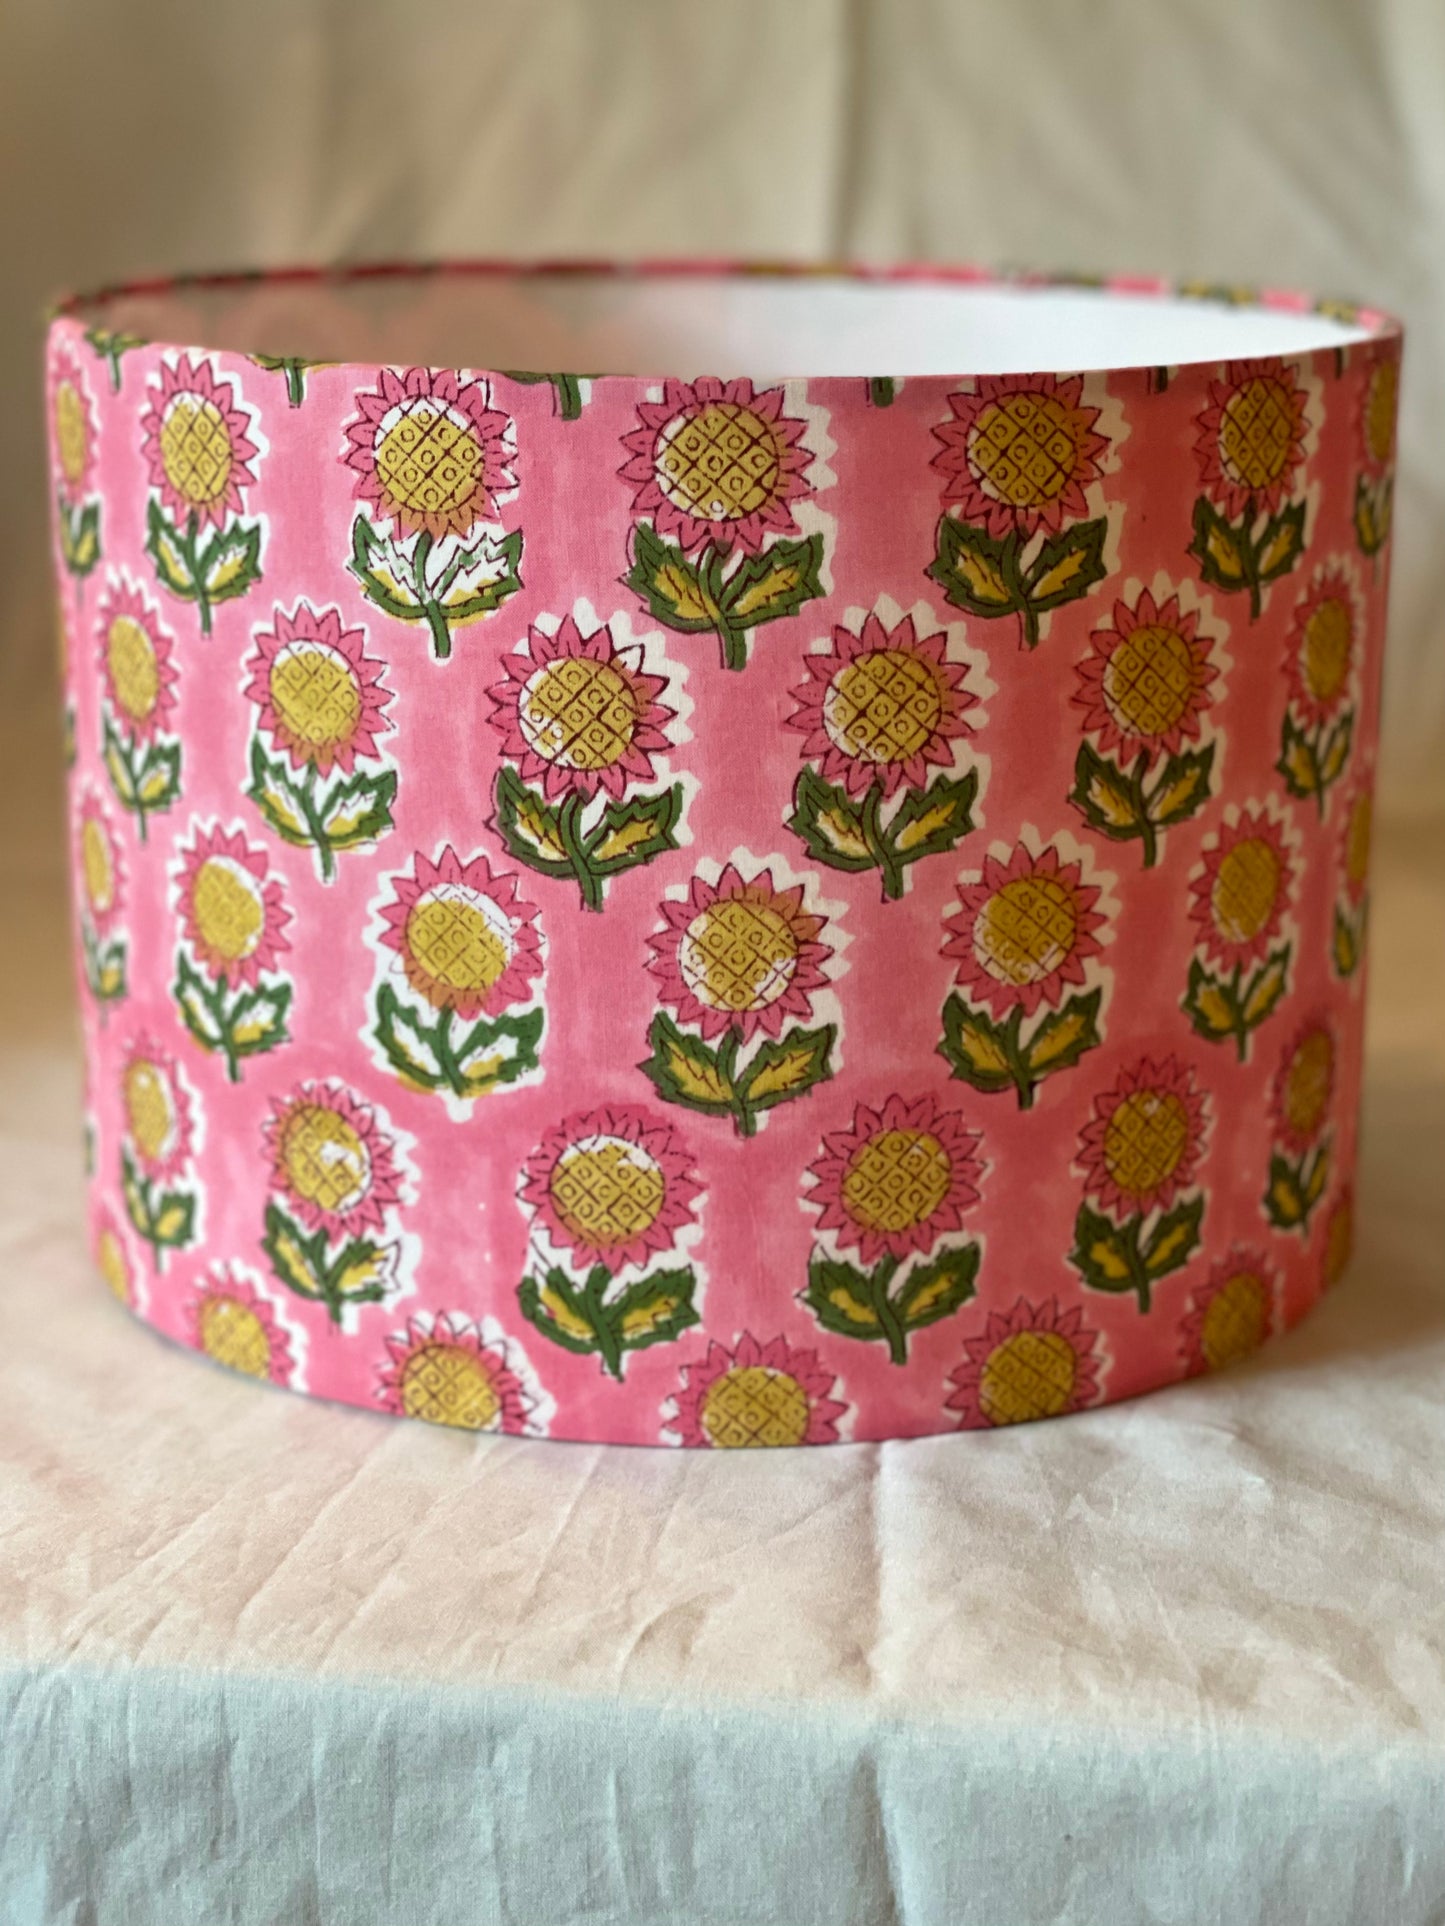 10 Inch Drum Lampshade. Indian Hand Block Print. Ruddy Pink with Ochre and Army Green Flower Motif.